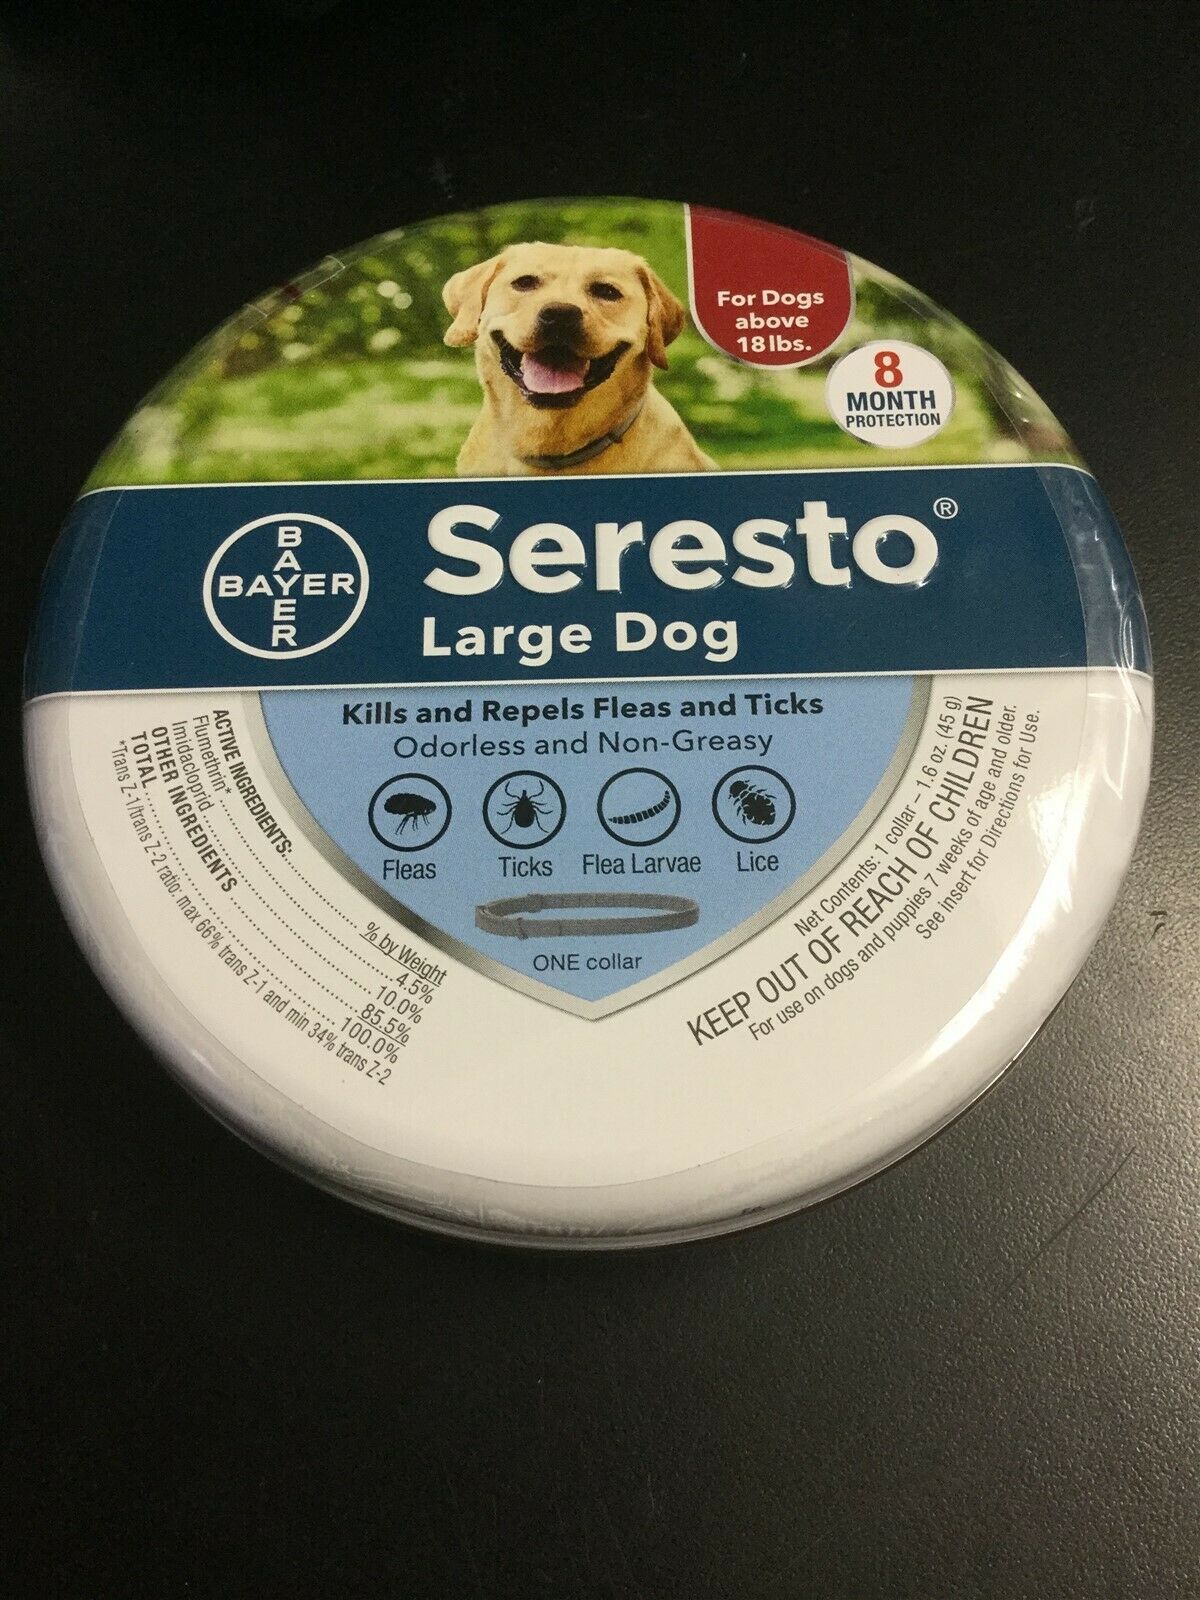 Bayer Seresto Flea And Tick Collar For Large Dog Over 18lbs, 8 Month #9607